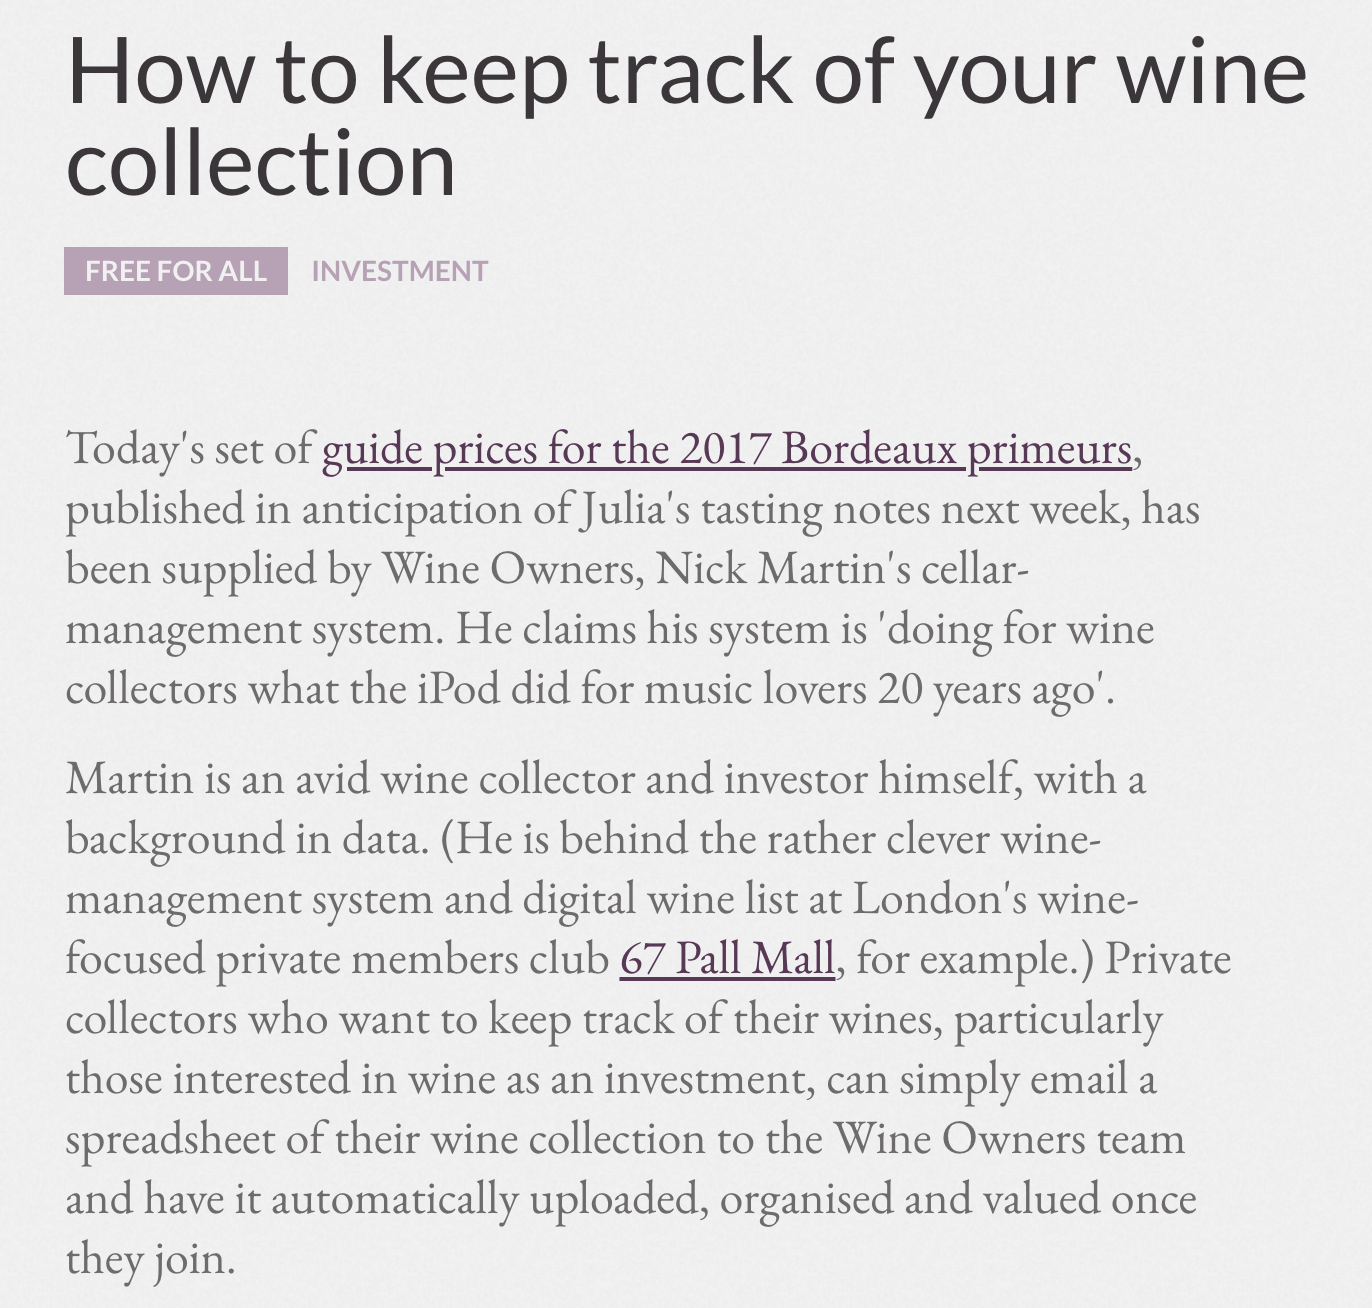 Jancis Robinson - How to keep track of your wine collection